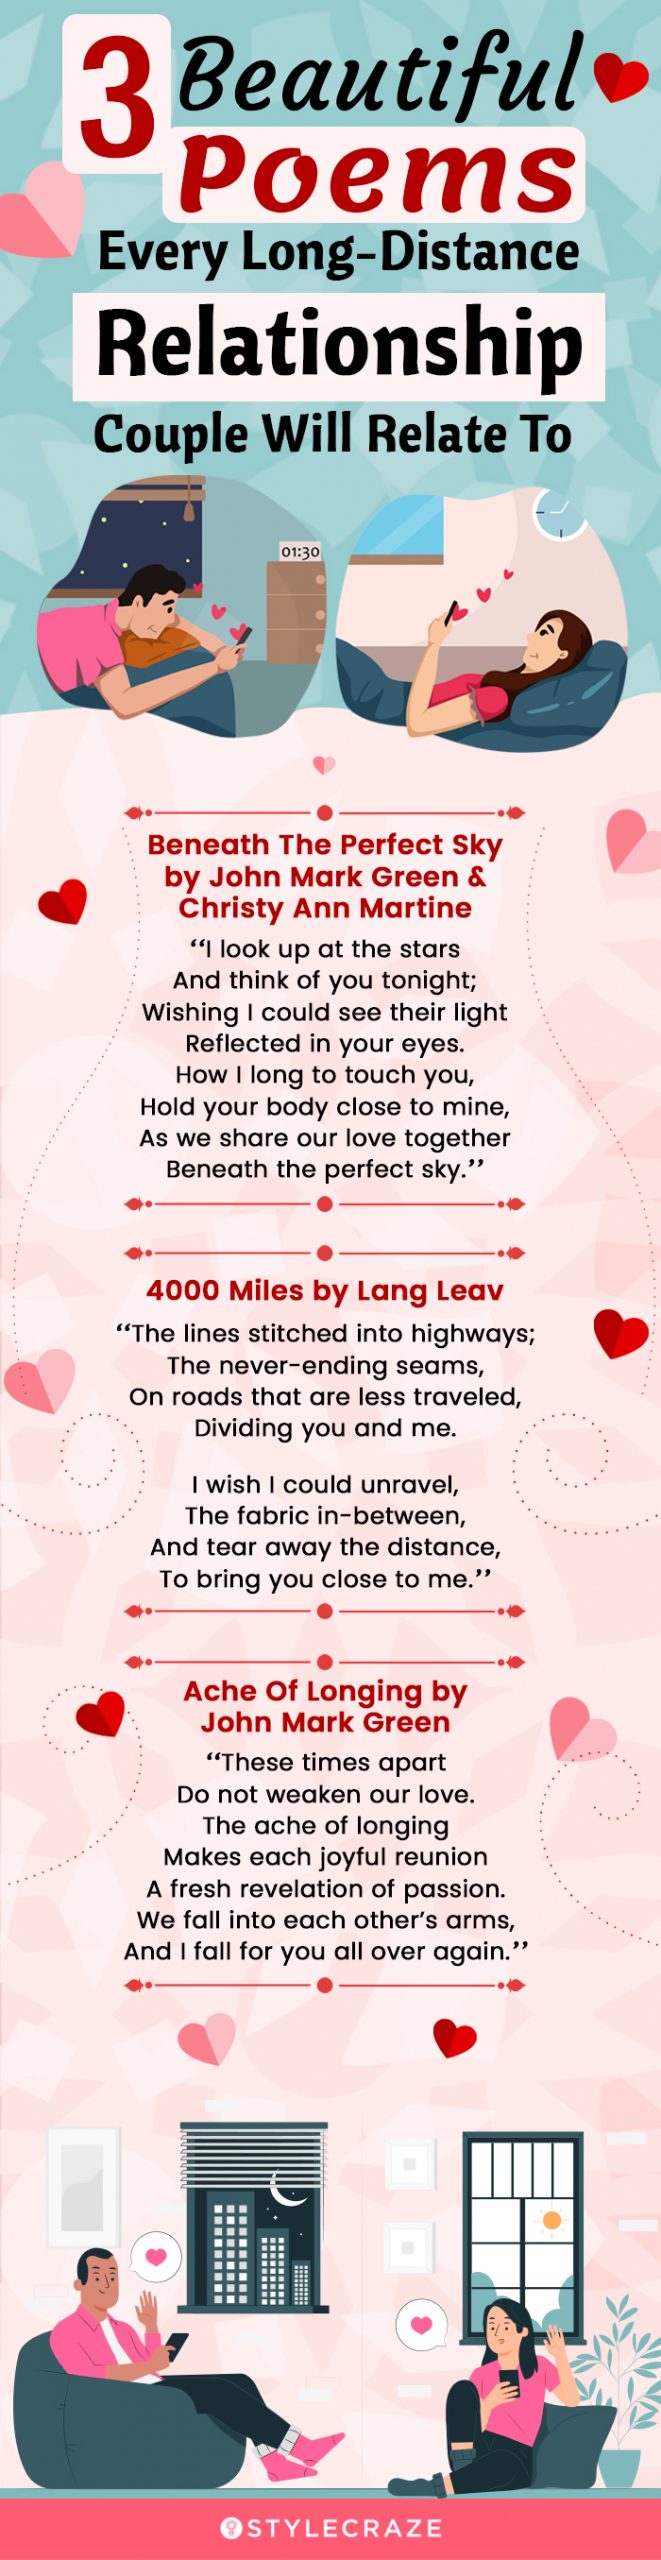 3 beautiful poems every long-distance relationship couple will relate to (infographic)